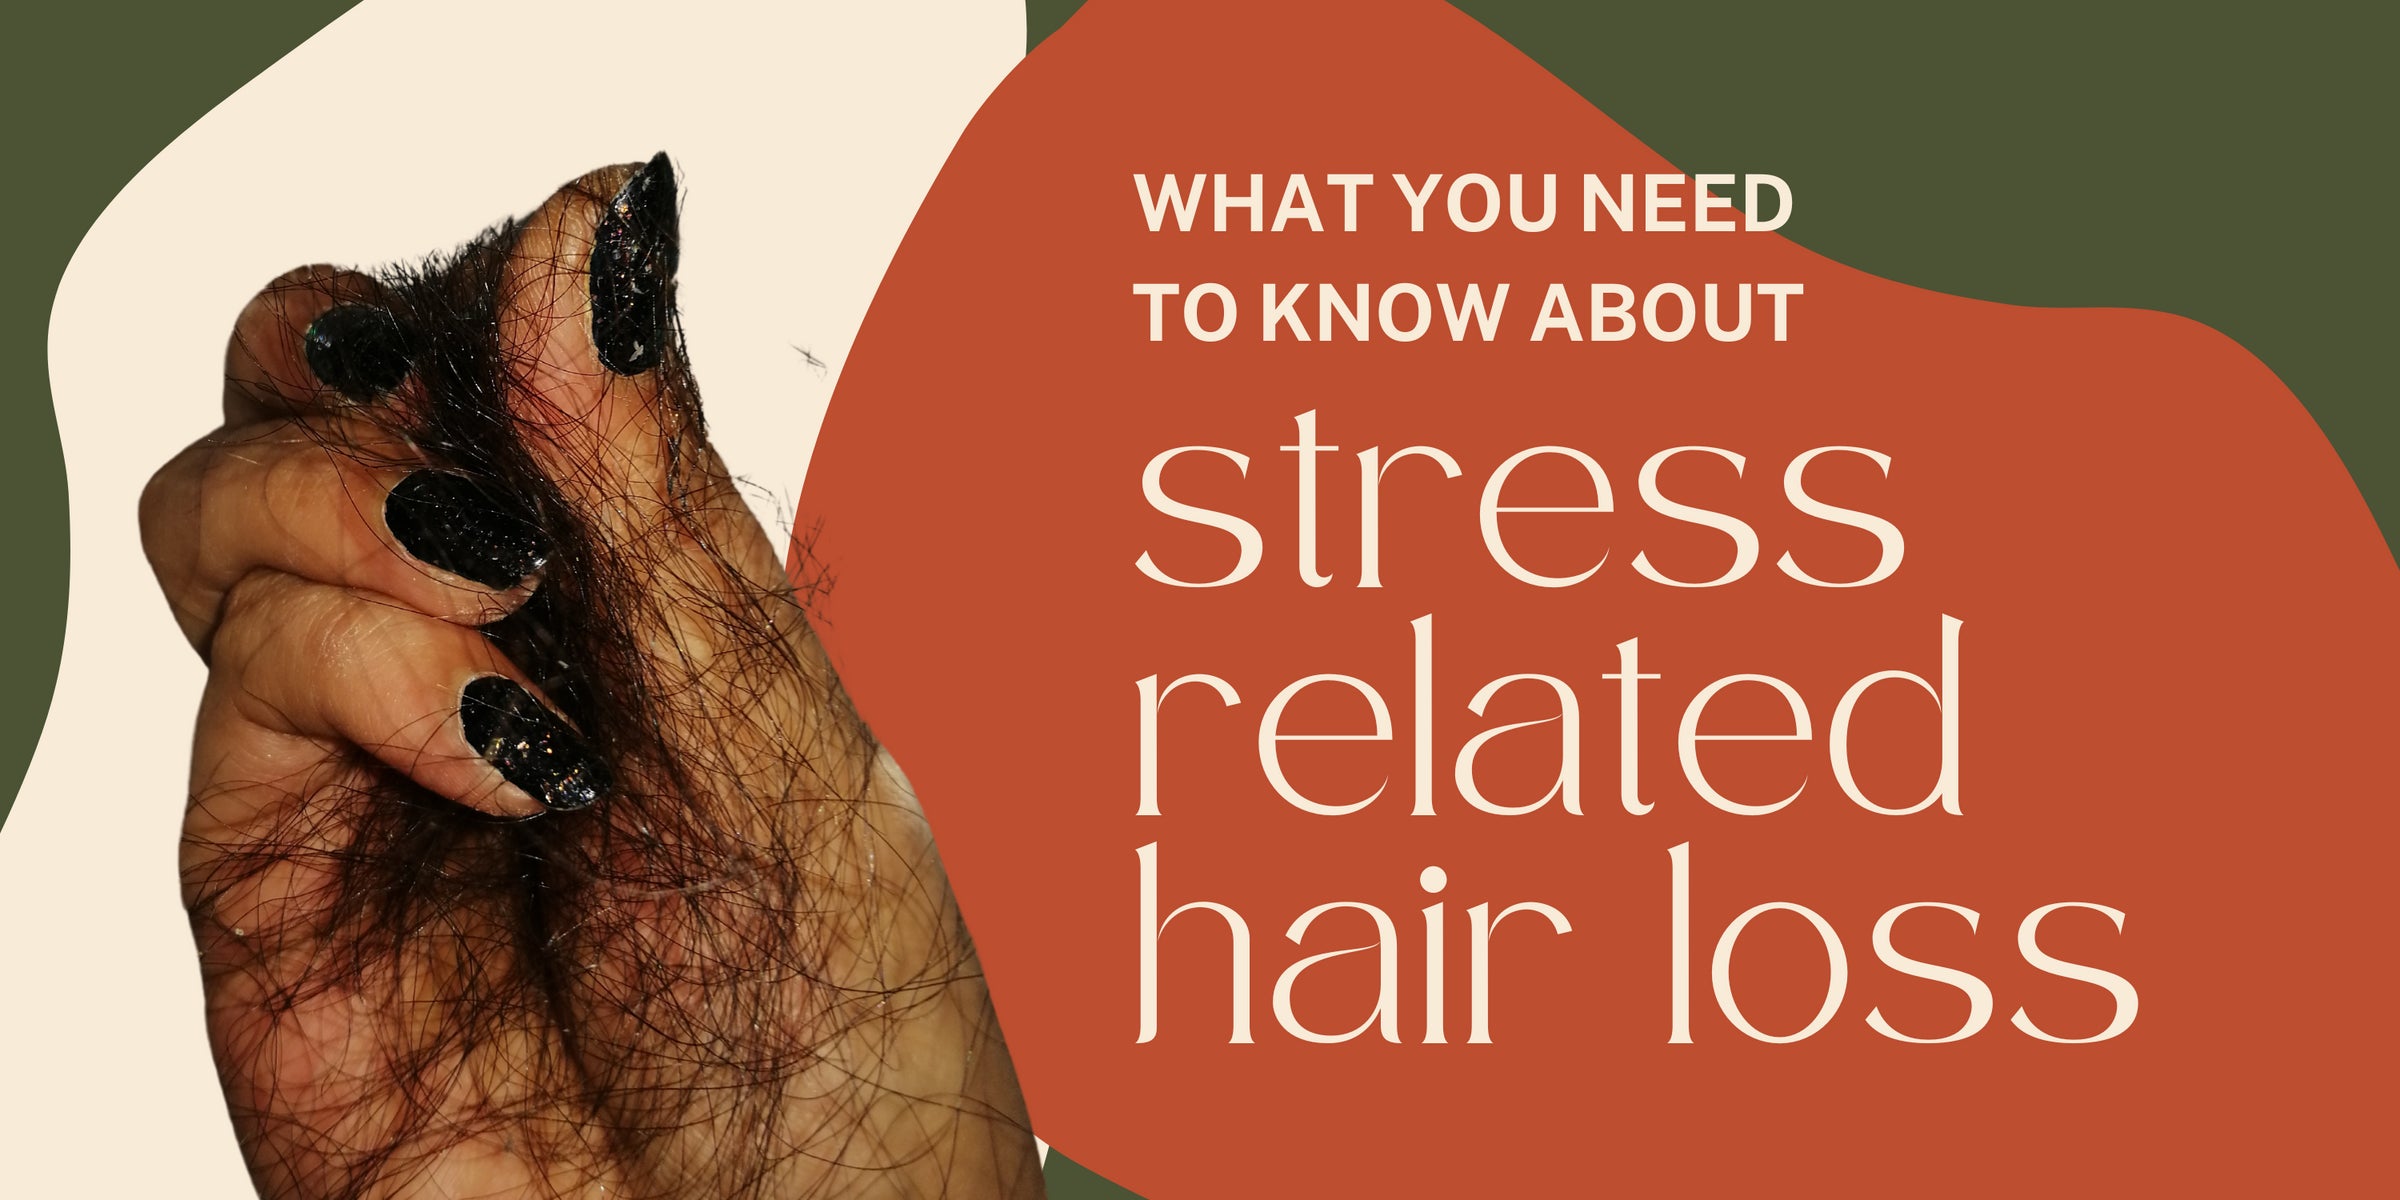 What You Need To Know About Stress-Related Hair Loss